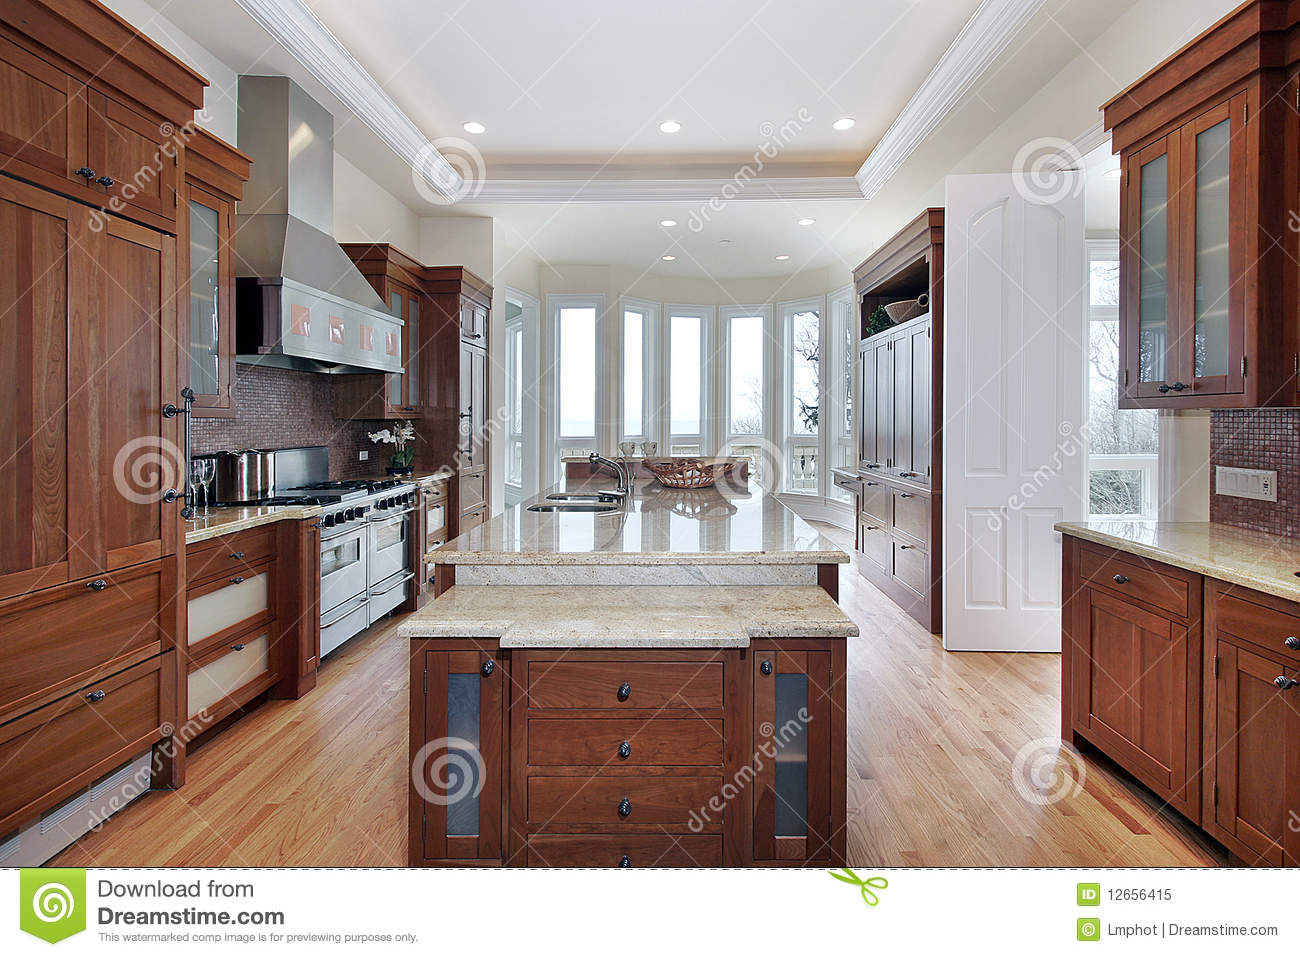 Kitchenn With Recessed Ceiling Royalty Free Stock Photo   Image